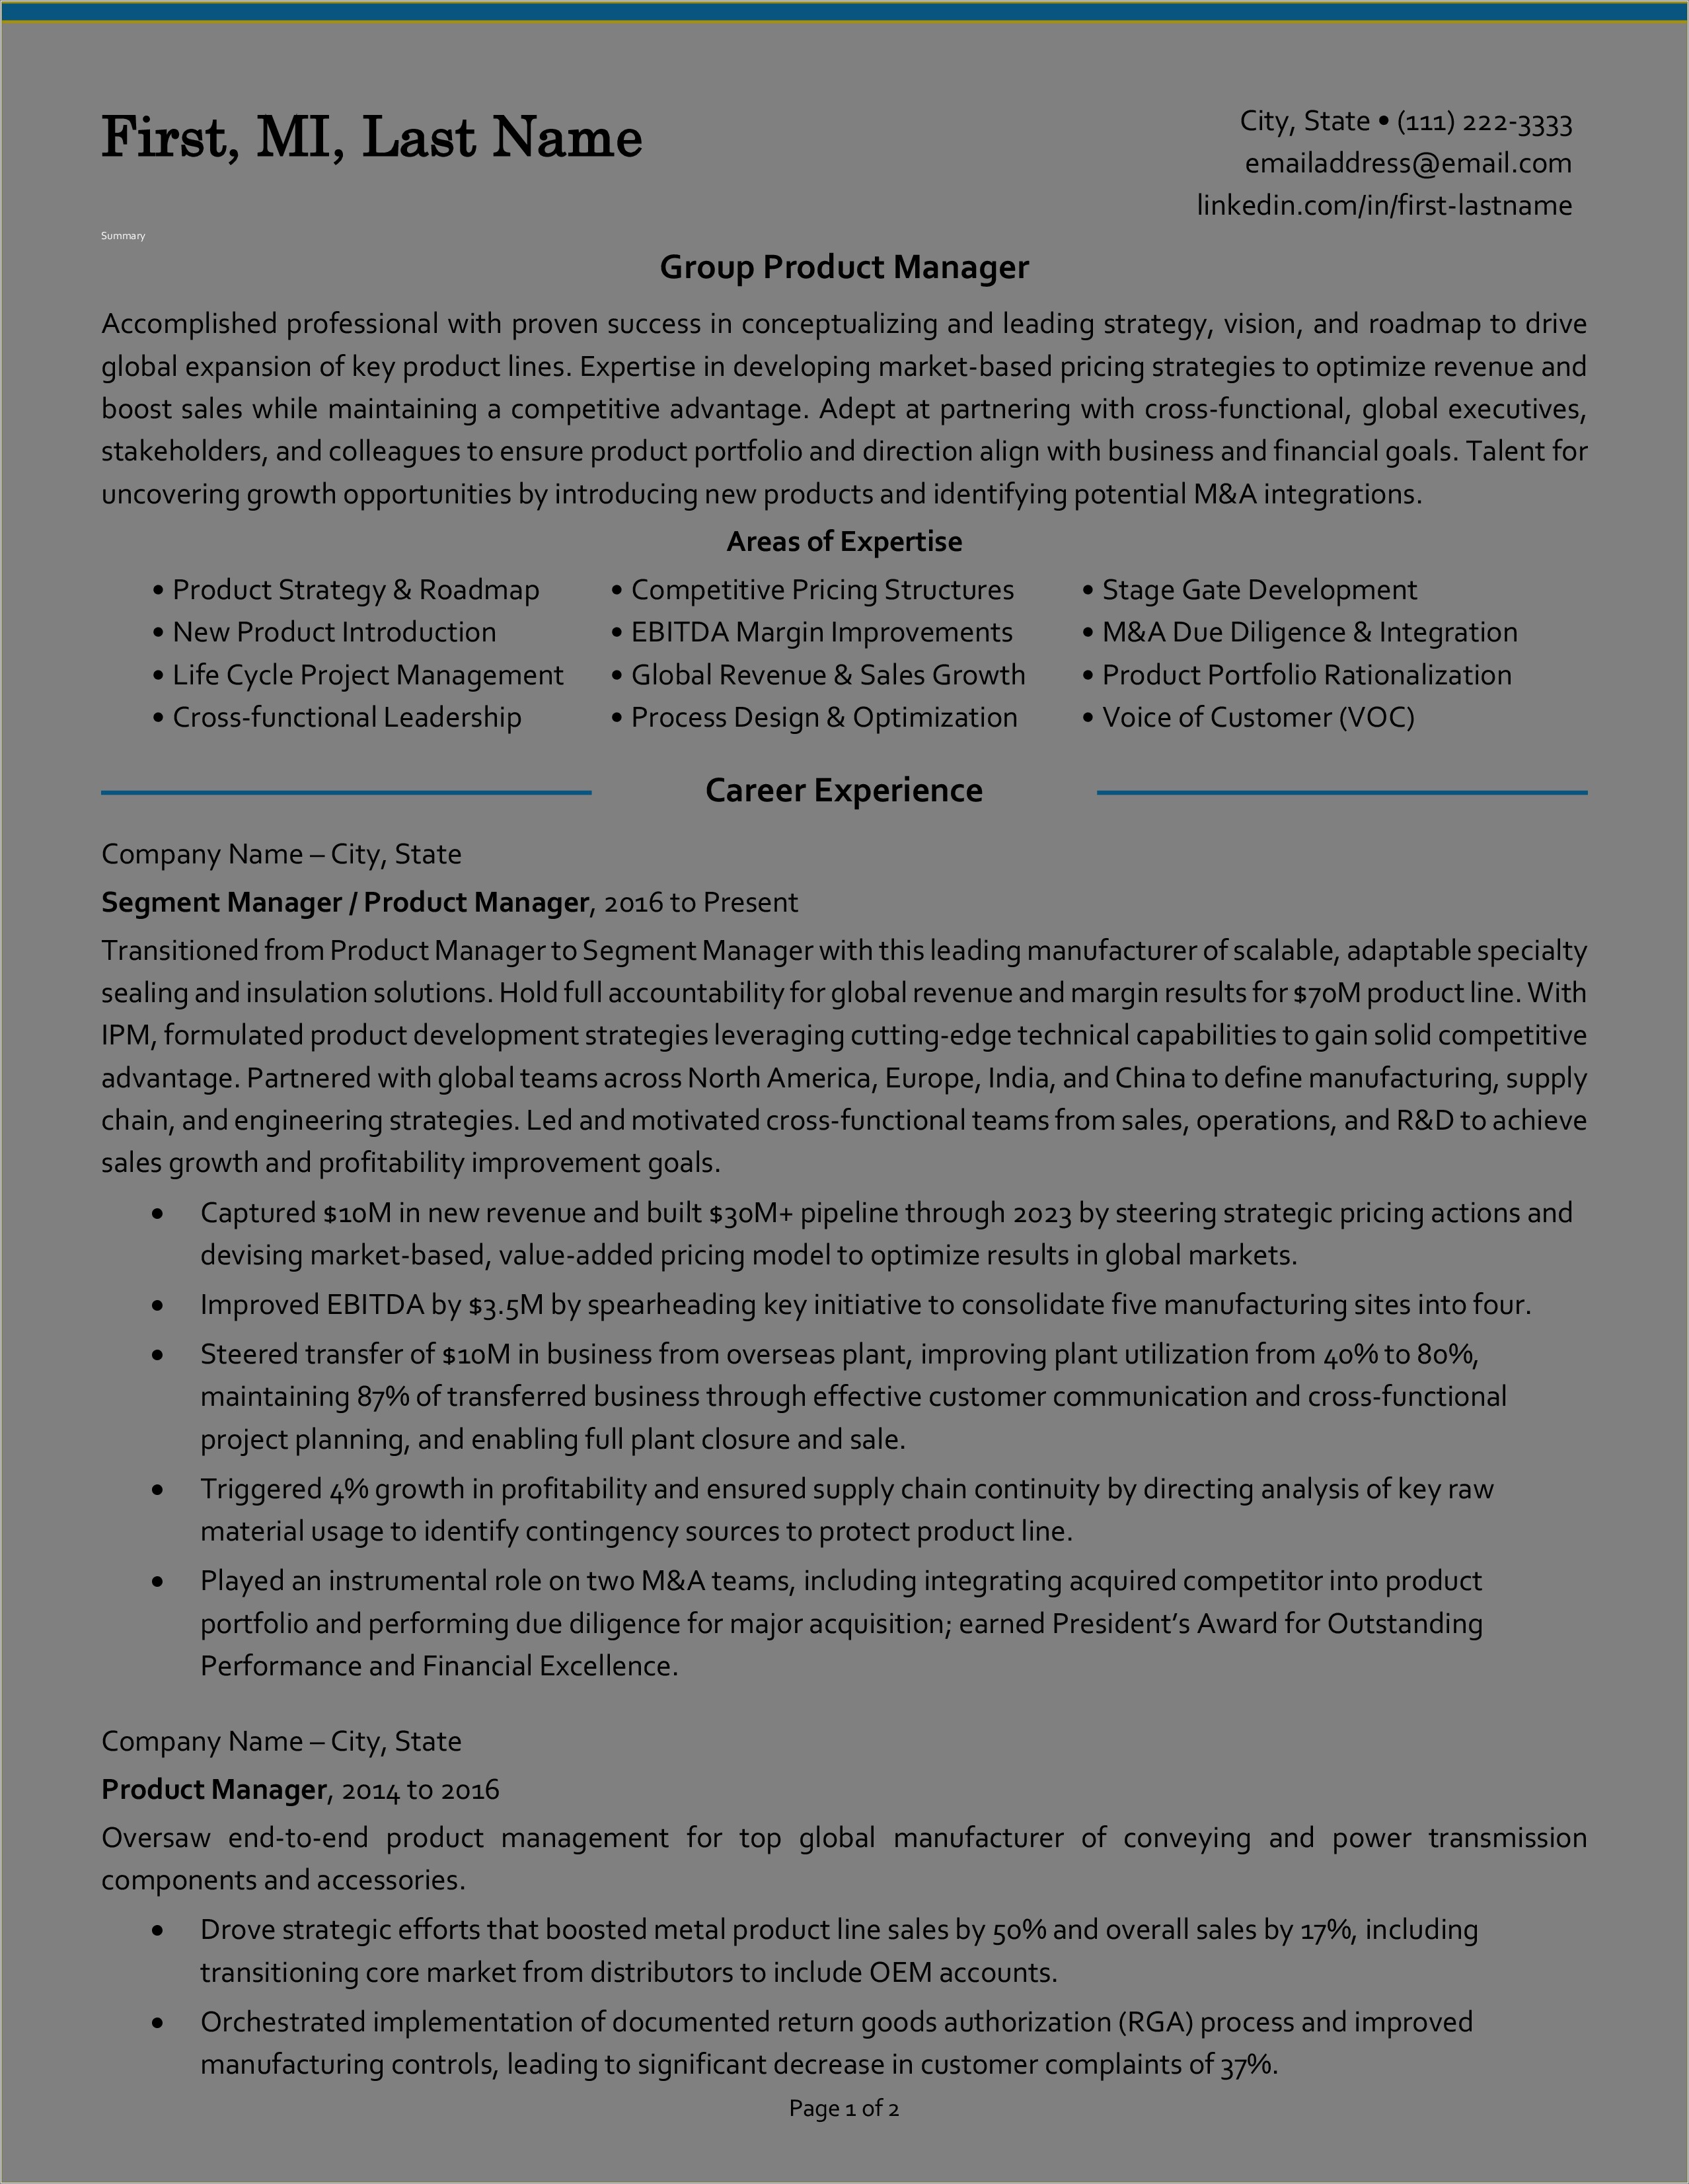 Resume Test For No Job Experence